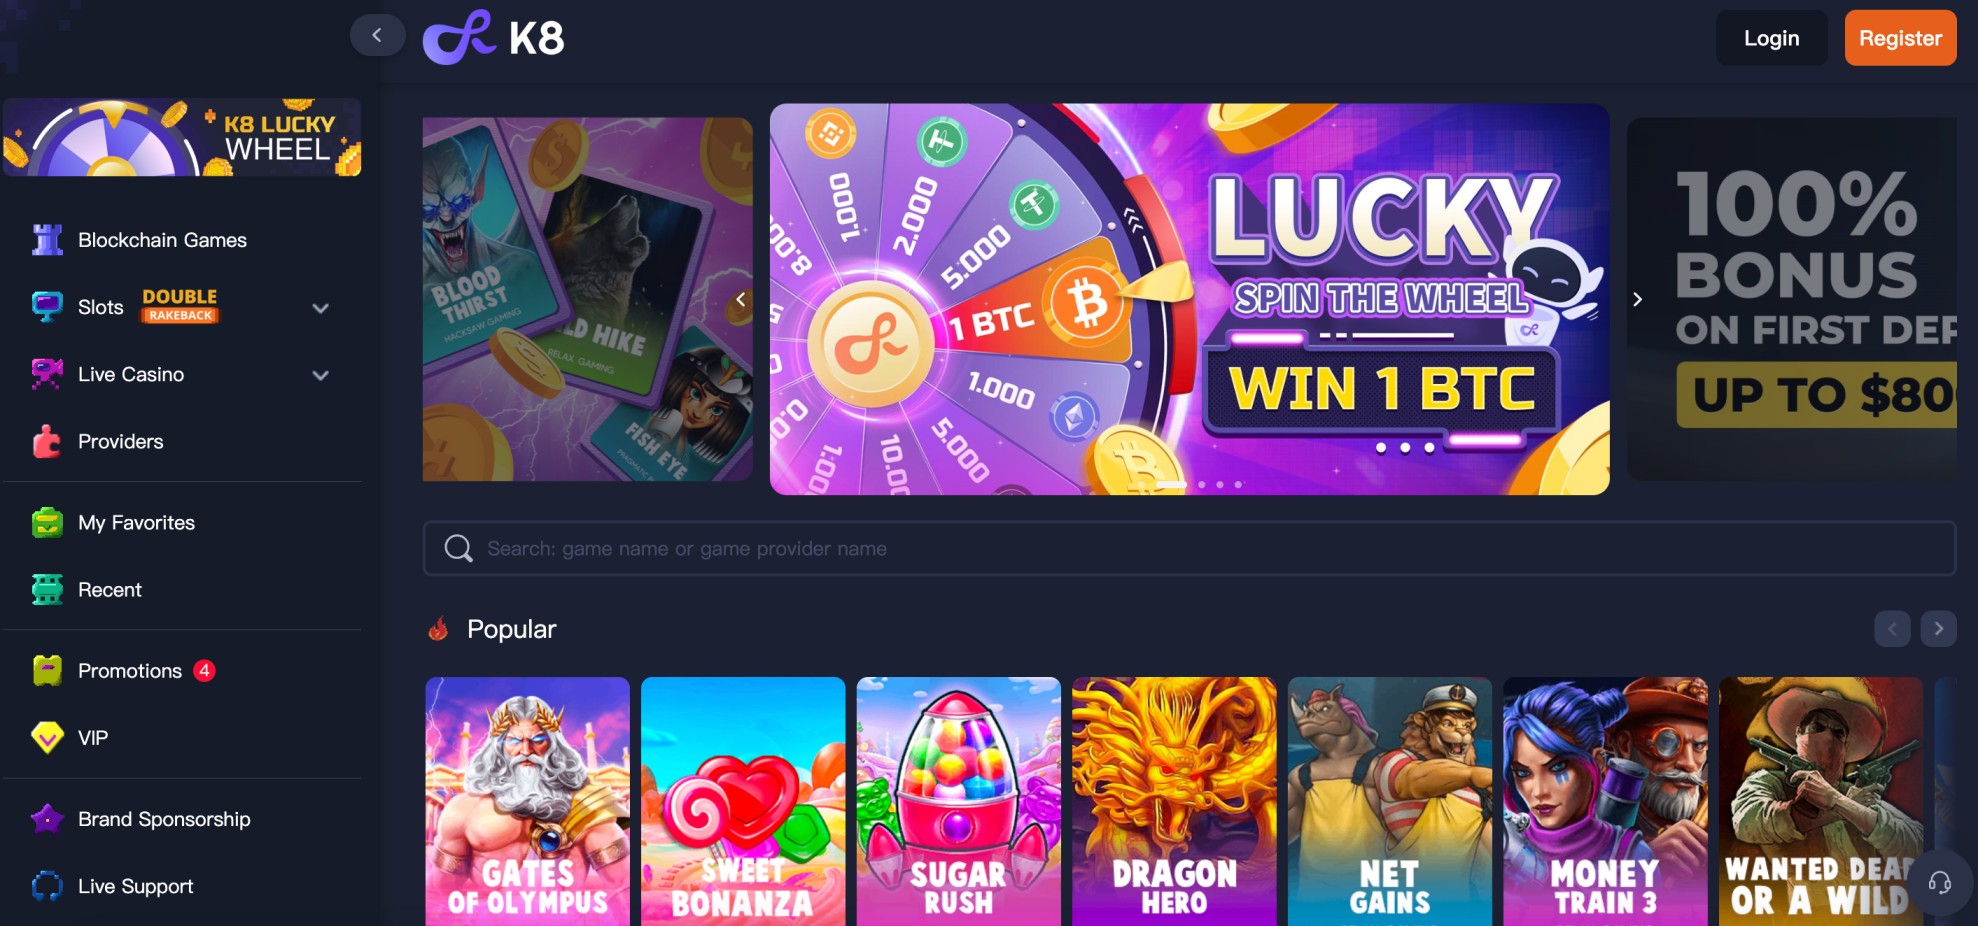 K8 casino review 